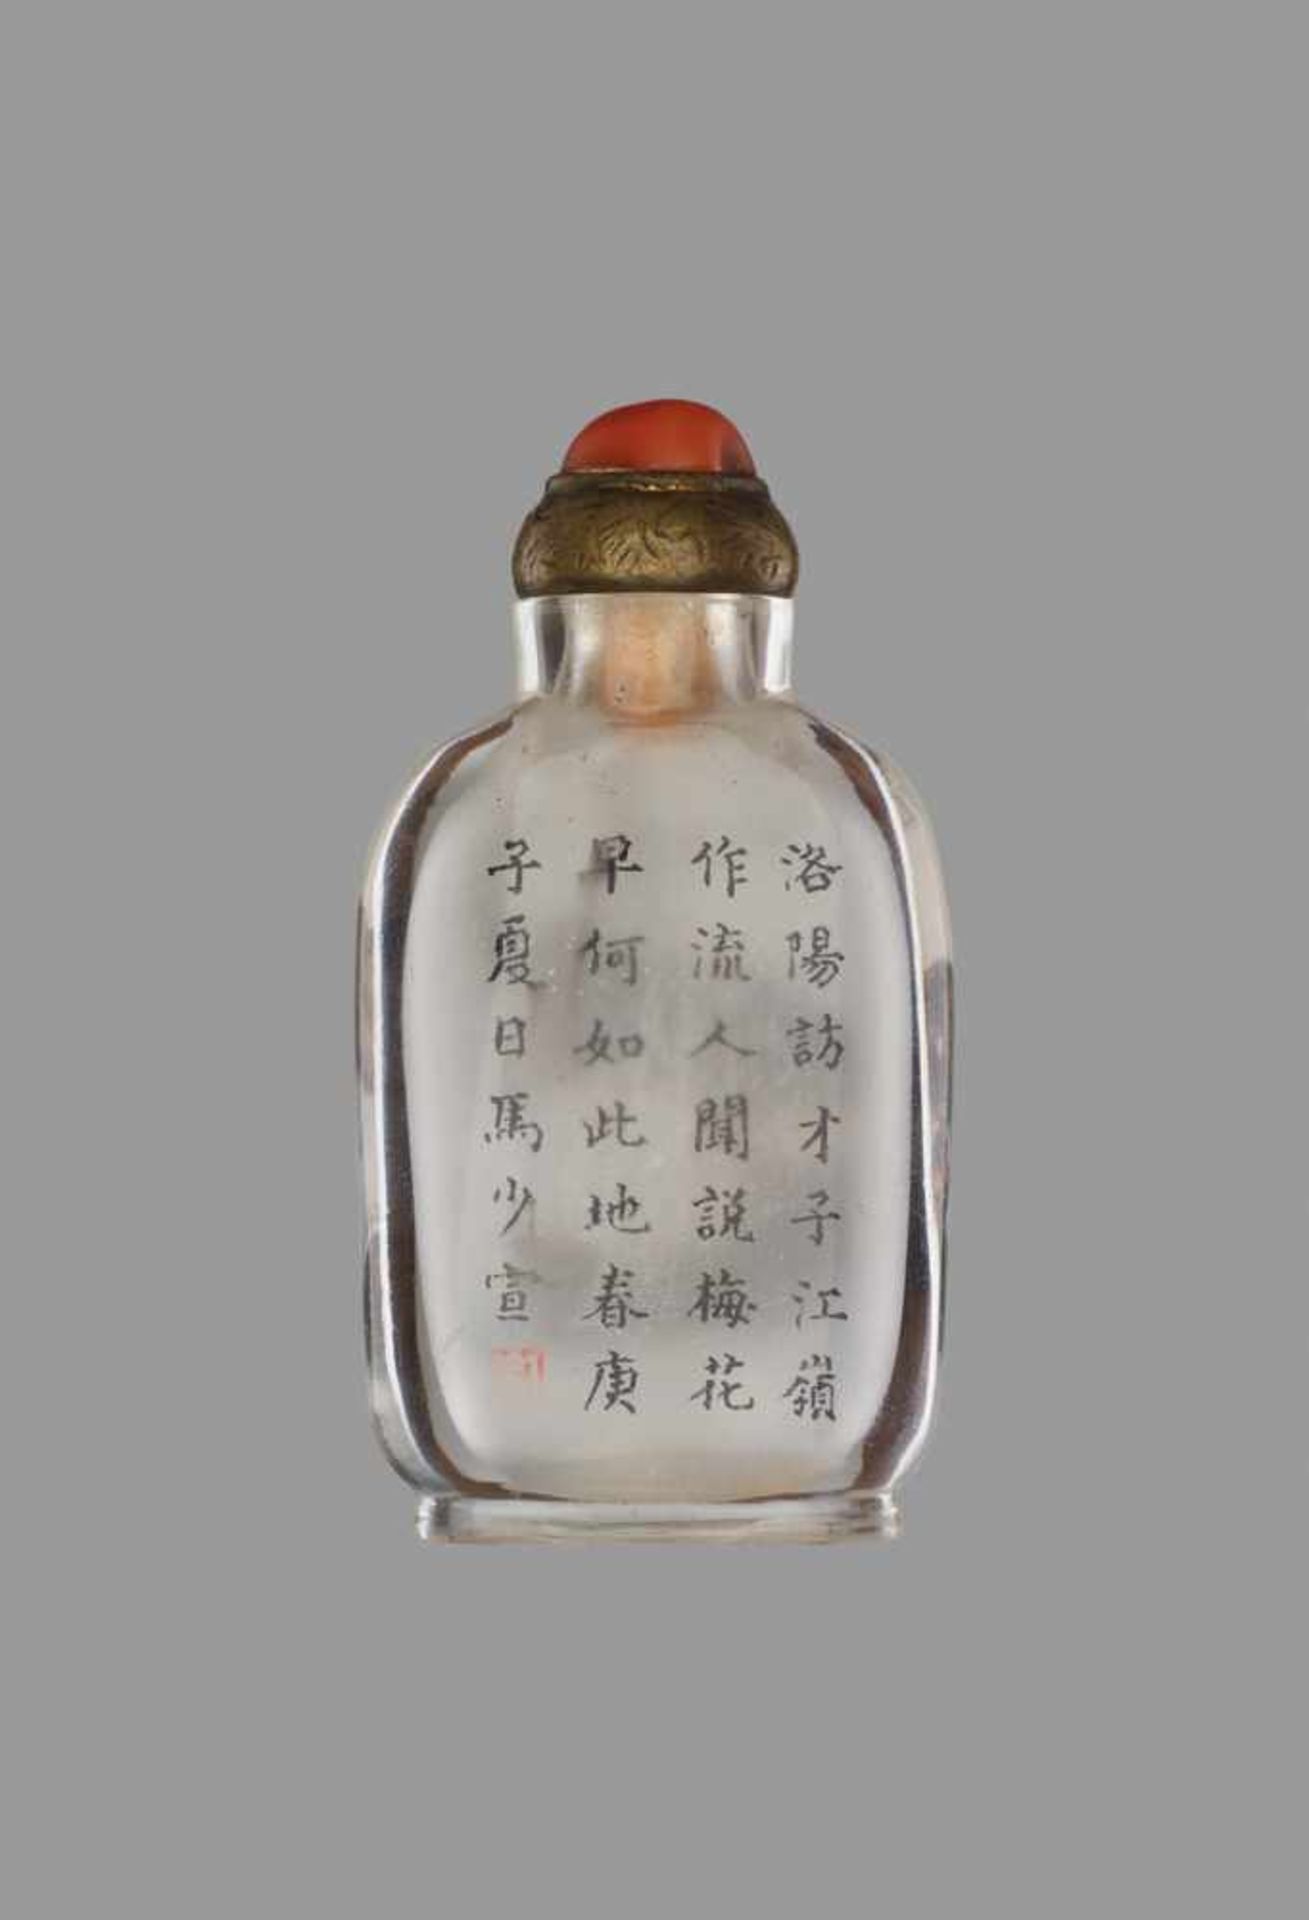 A RARE INSIDE-PAINTED MINIATURE GLASS ‘PLAYING CATS’ SNUFF BOTTLE, MA SHAOXUAN(the smaller companion - Image 2 of 6